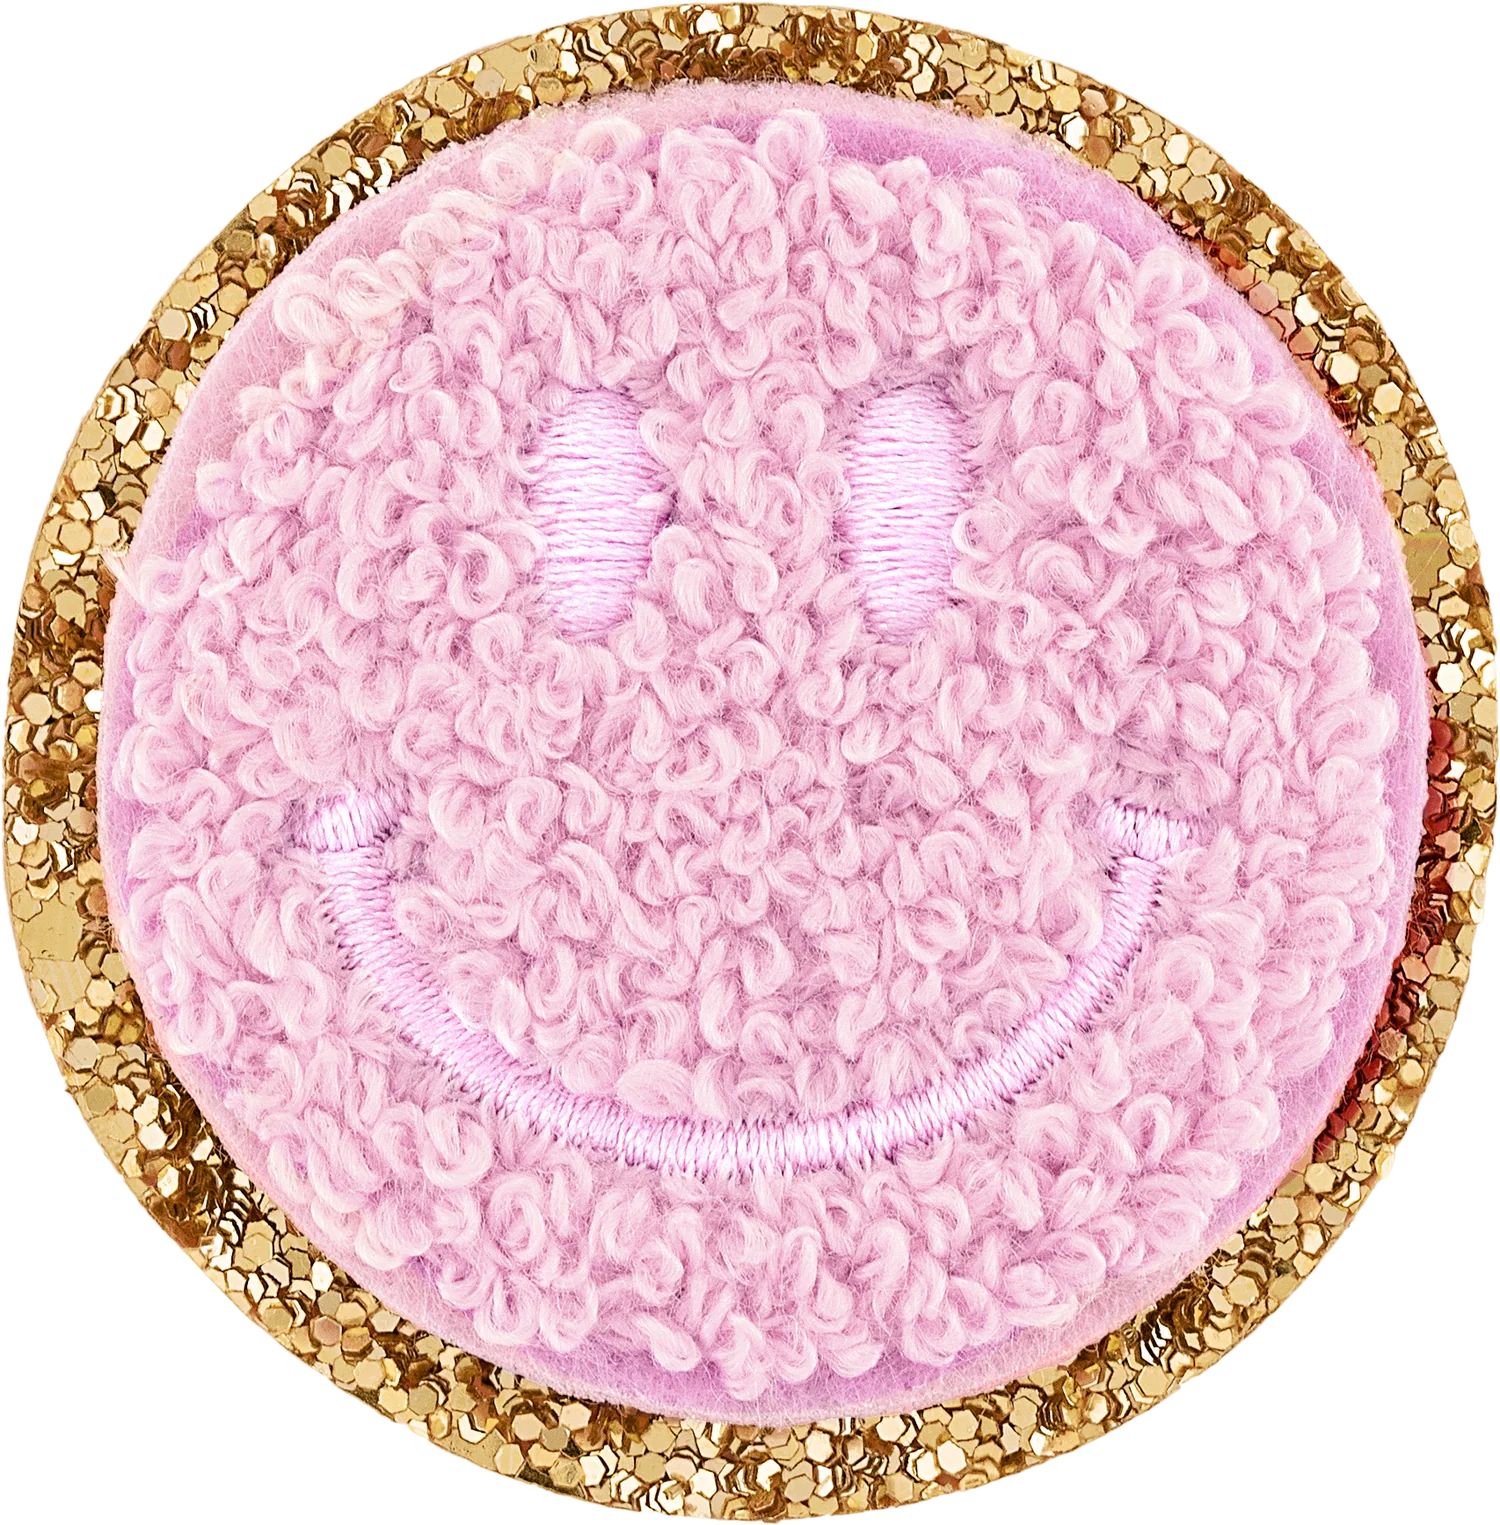 Glitter Smiley Face Patch | Embroidered Patch - Stoney Clover Lane | Stoney Clover Lane